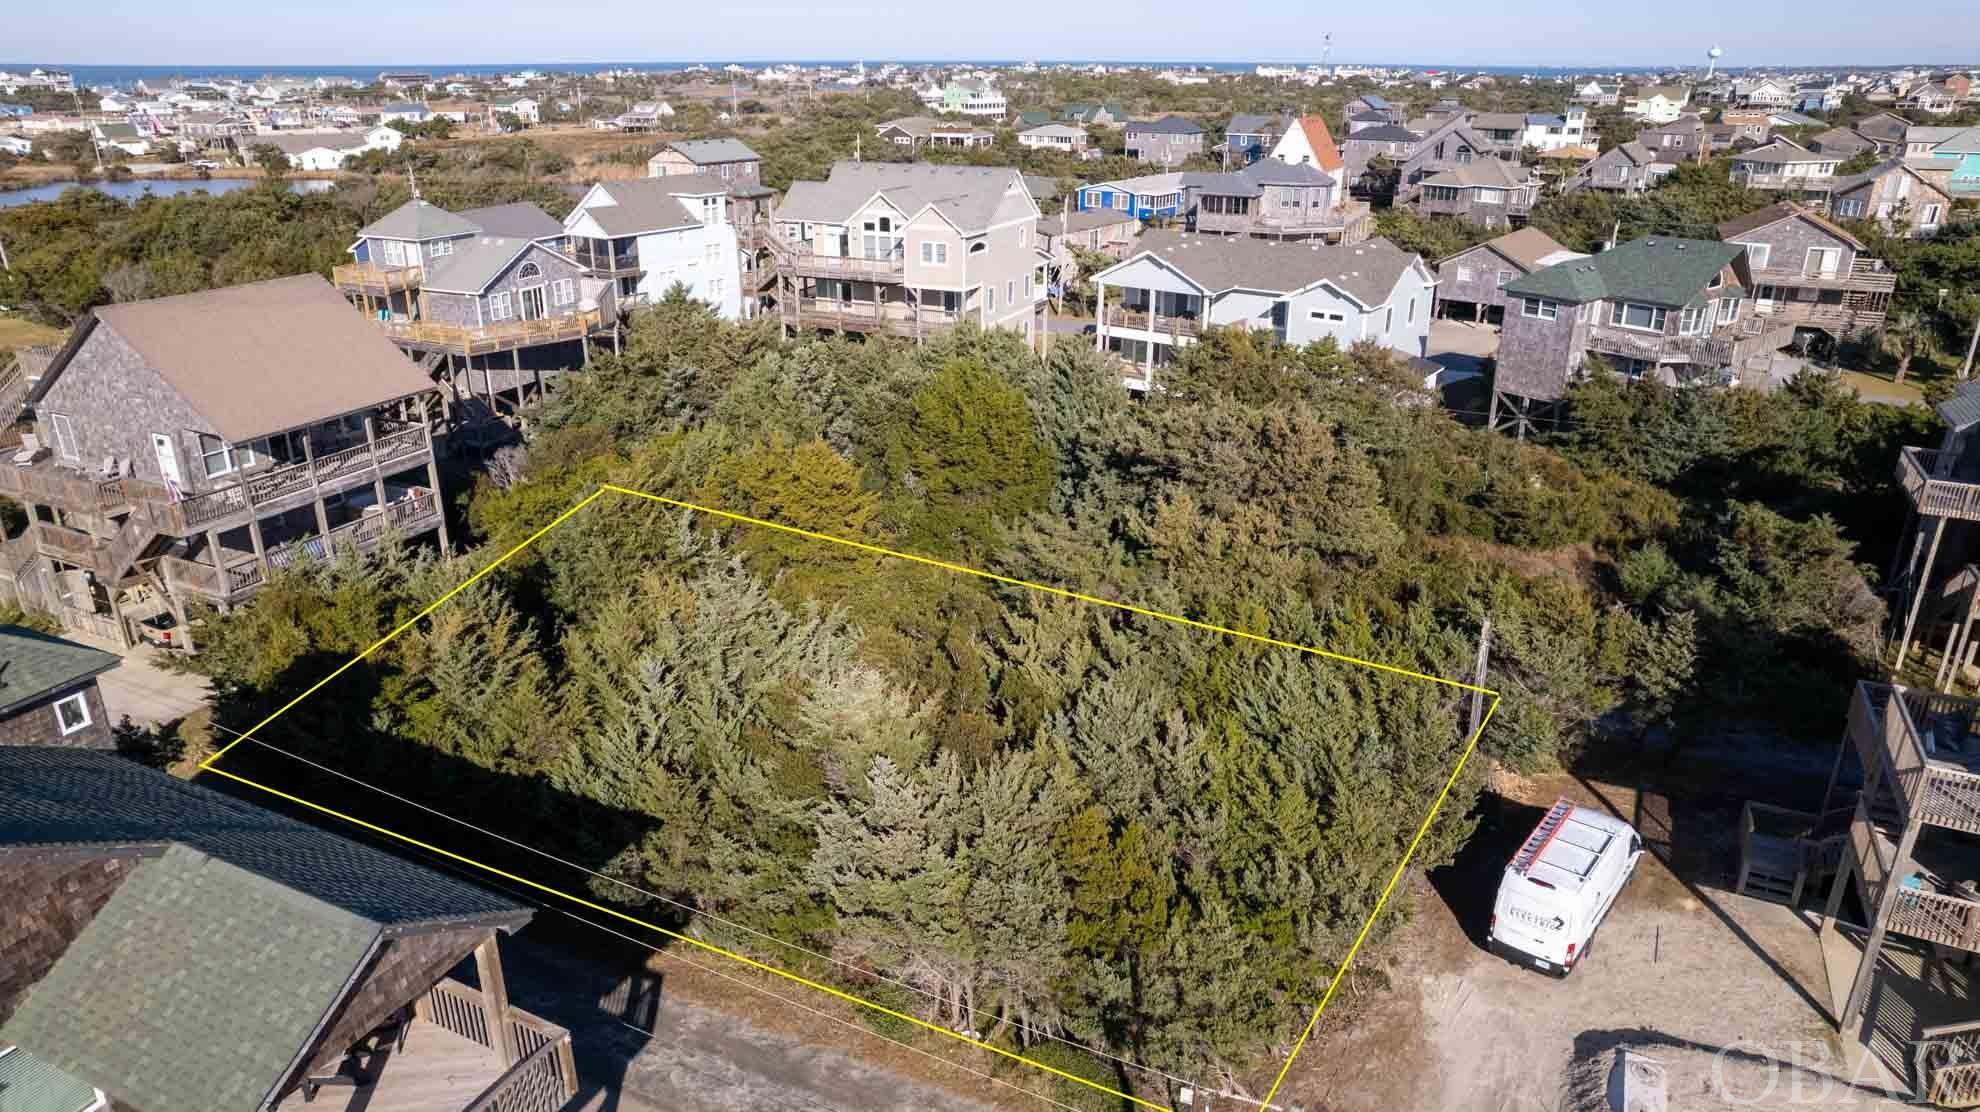 58215 Smell Wreck Lane, Hatteras, NC 27943, ,Lots/land,For sale,Smell Wreck Lane,124257